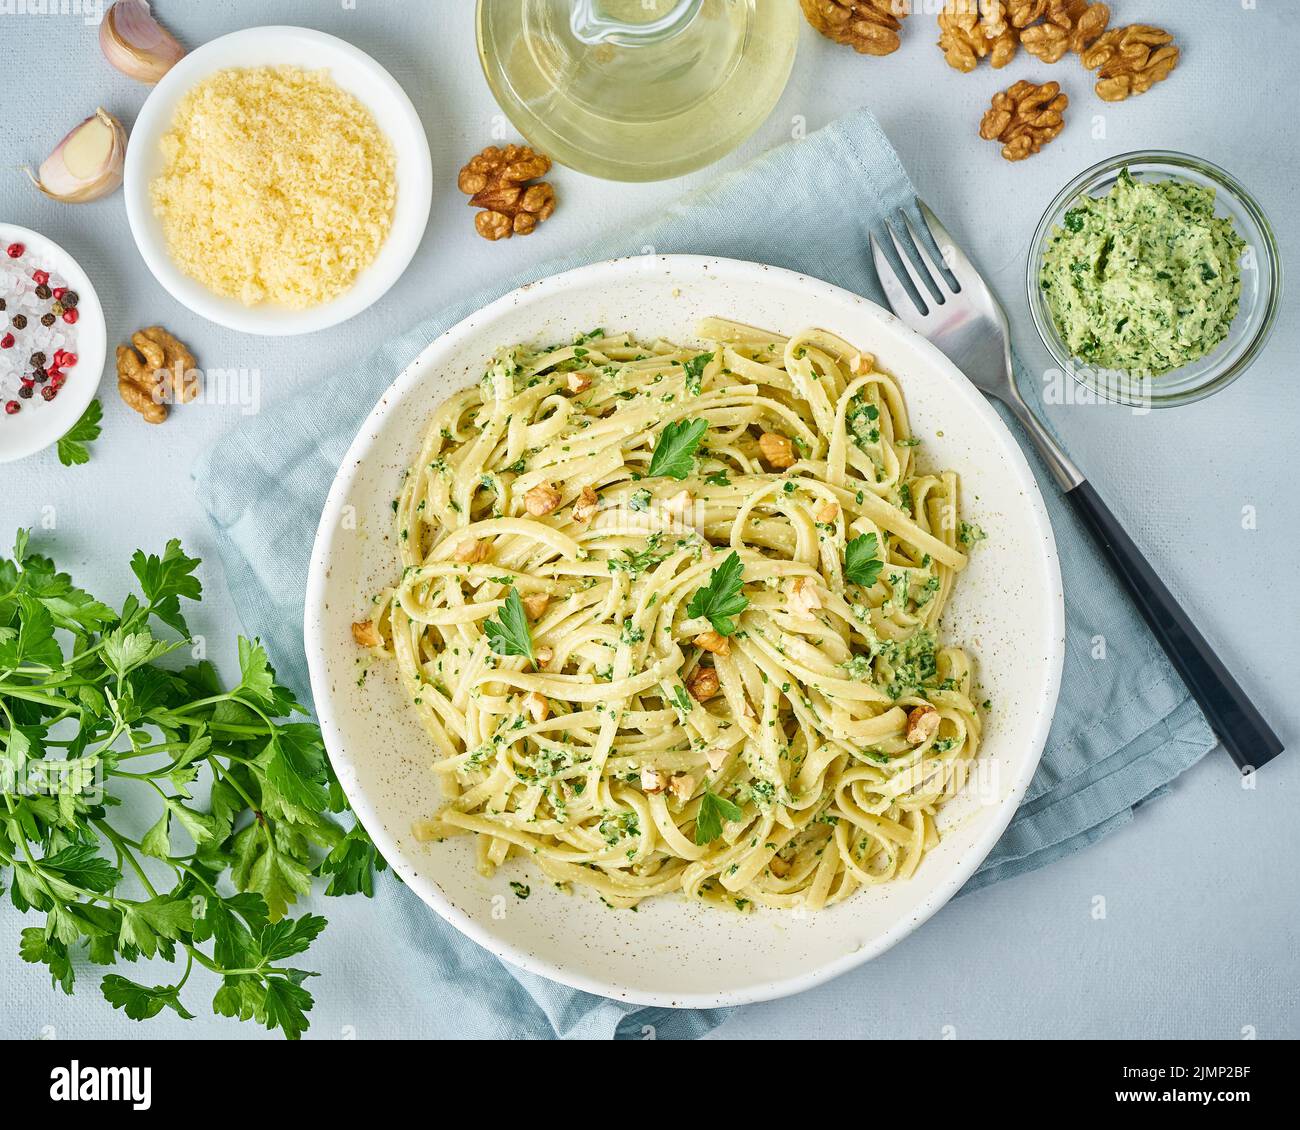 Pesto pasta, bavette with walnuts, parsley, garlic, nuts, olive oil. Top view, close-up Stock Photo